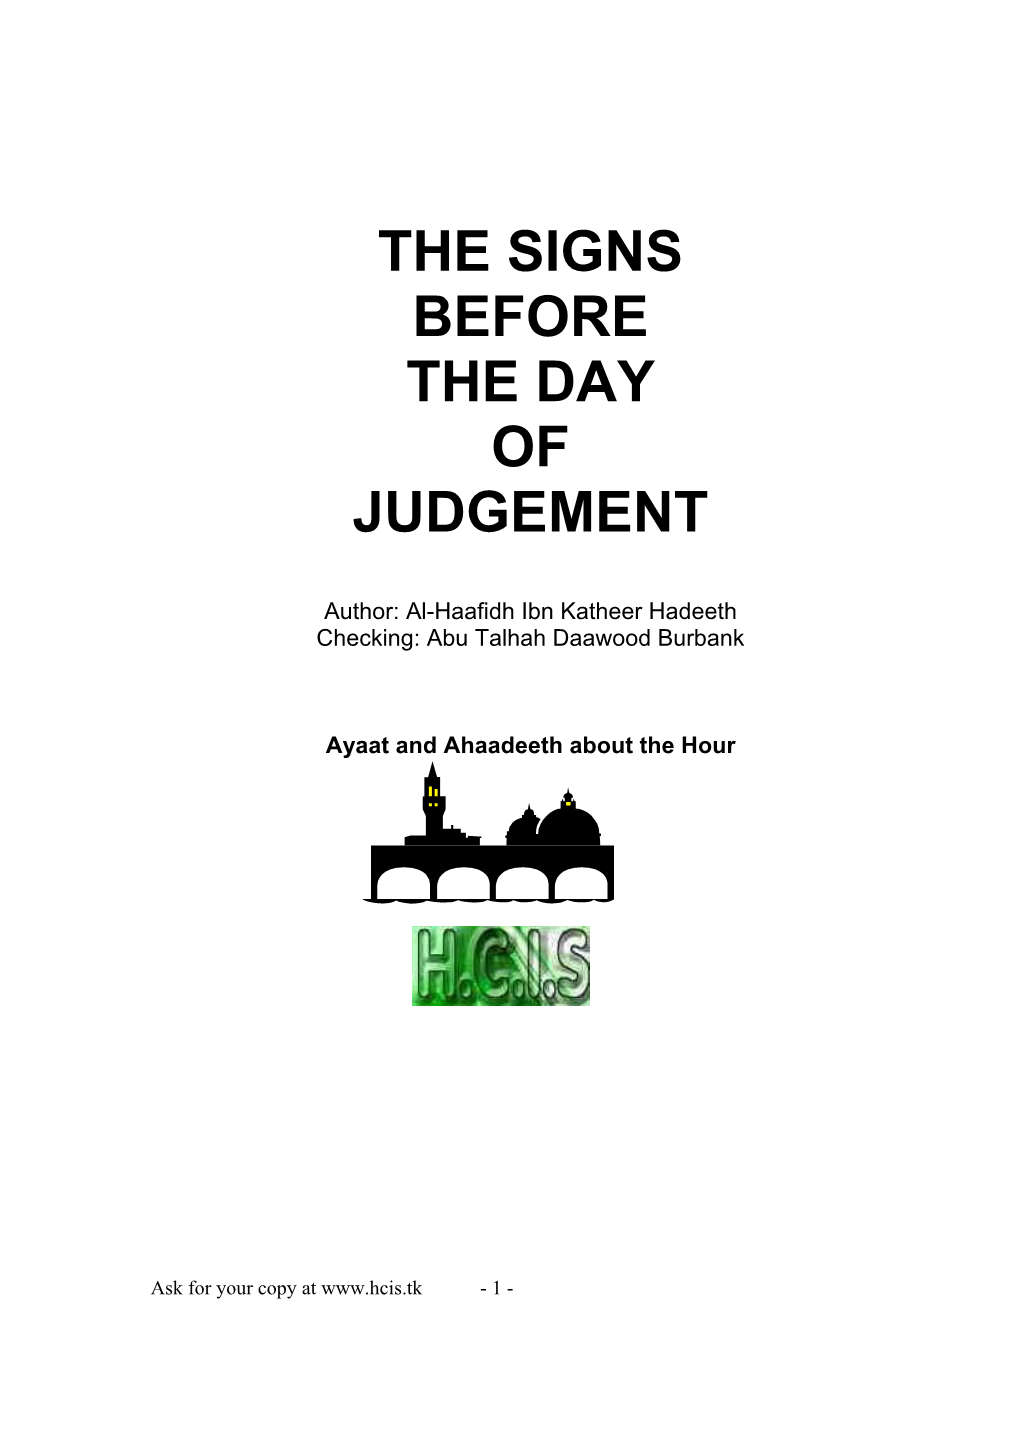 The Signs Before the Day of Judgement